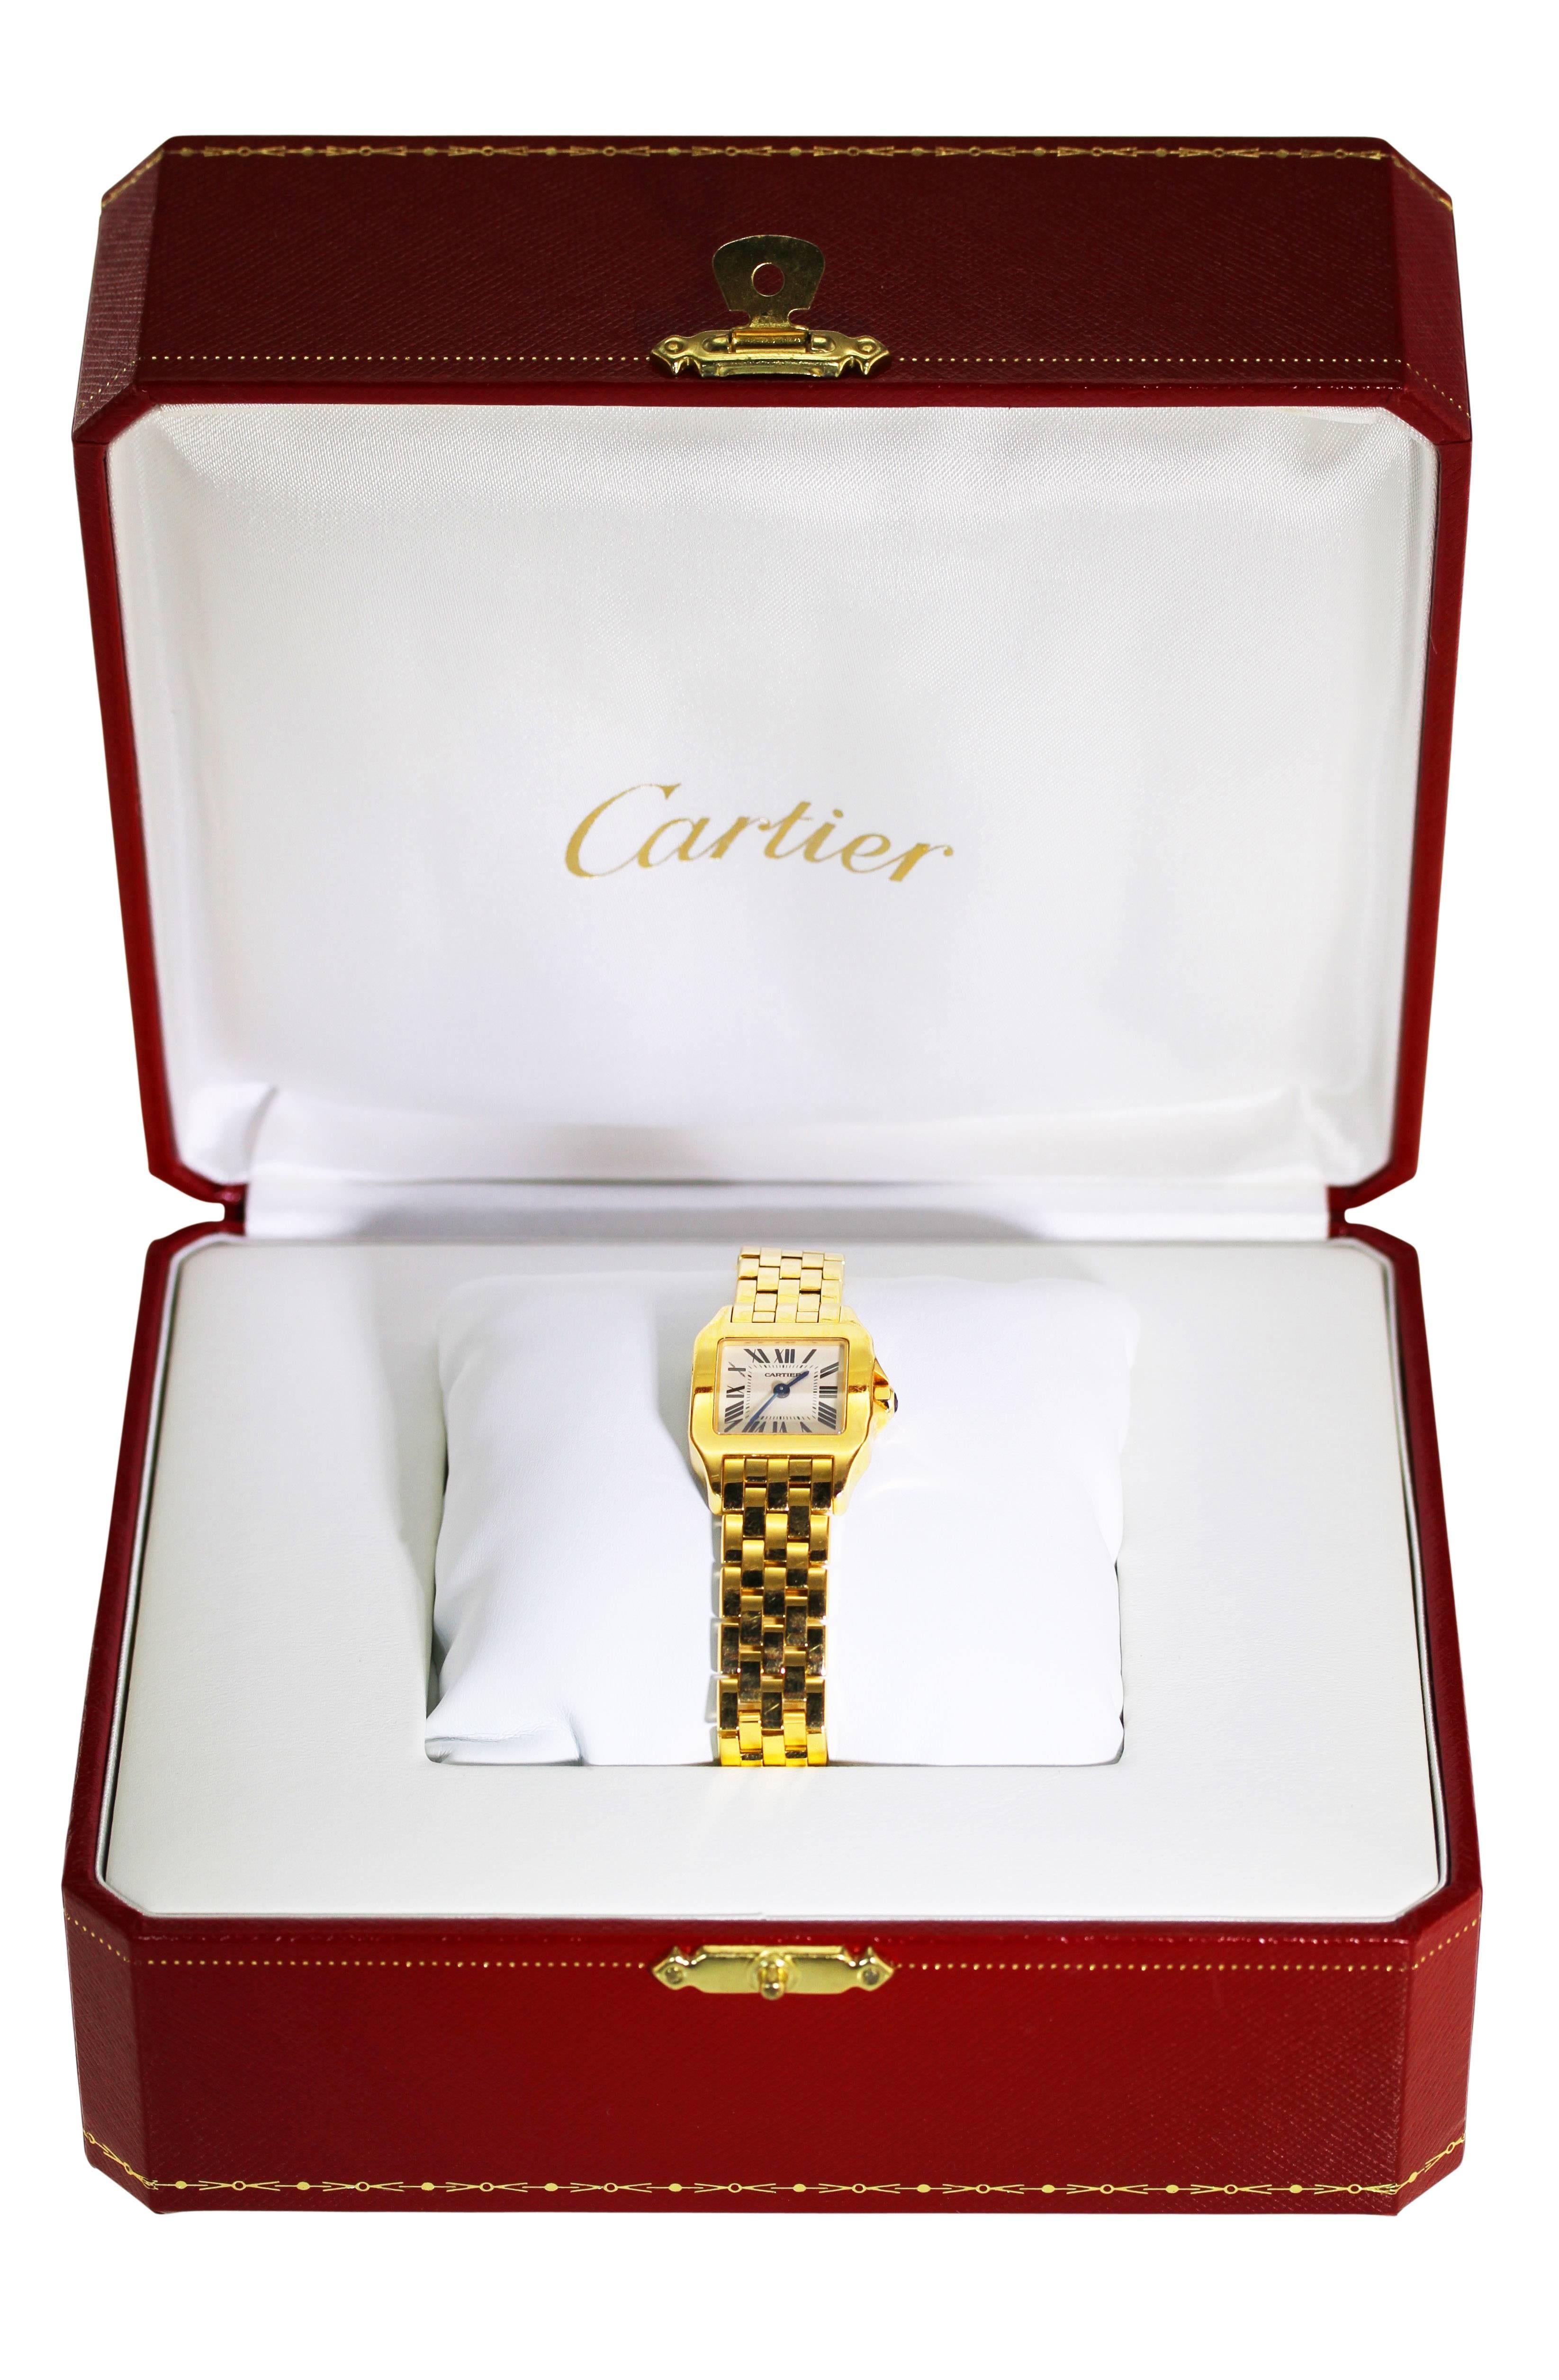 18 karat gold 'Santos Demoiselle' wrist watch by Cartier
• Signed Cartier, caseback numbered 826 LX 2699
• Accompanied by Saks Fifth Avenue Insurance Appraisal
• Square dial with Roman numerals and blue steeled 
• Quartz movement
• Length 5 3/4